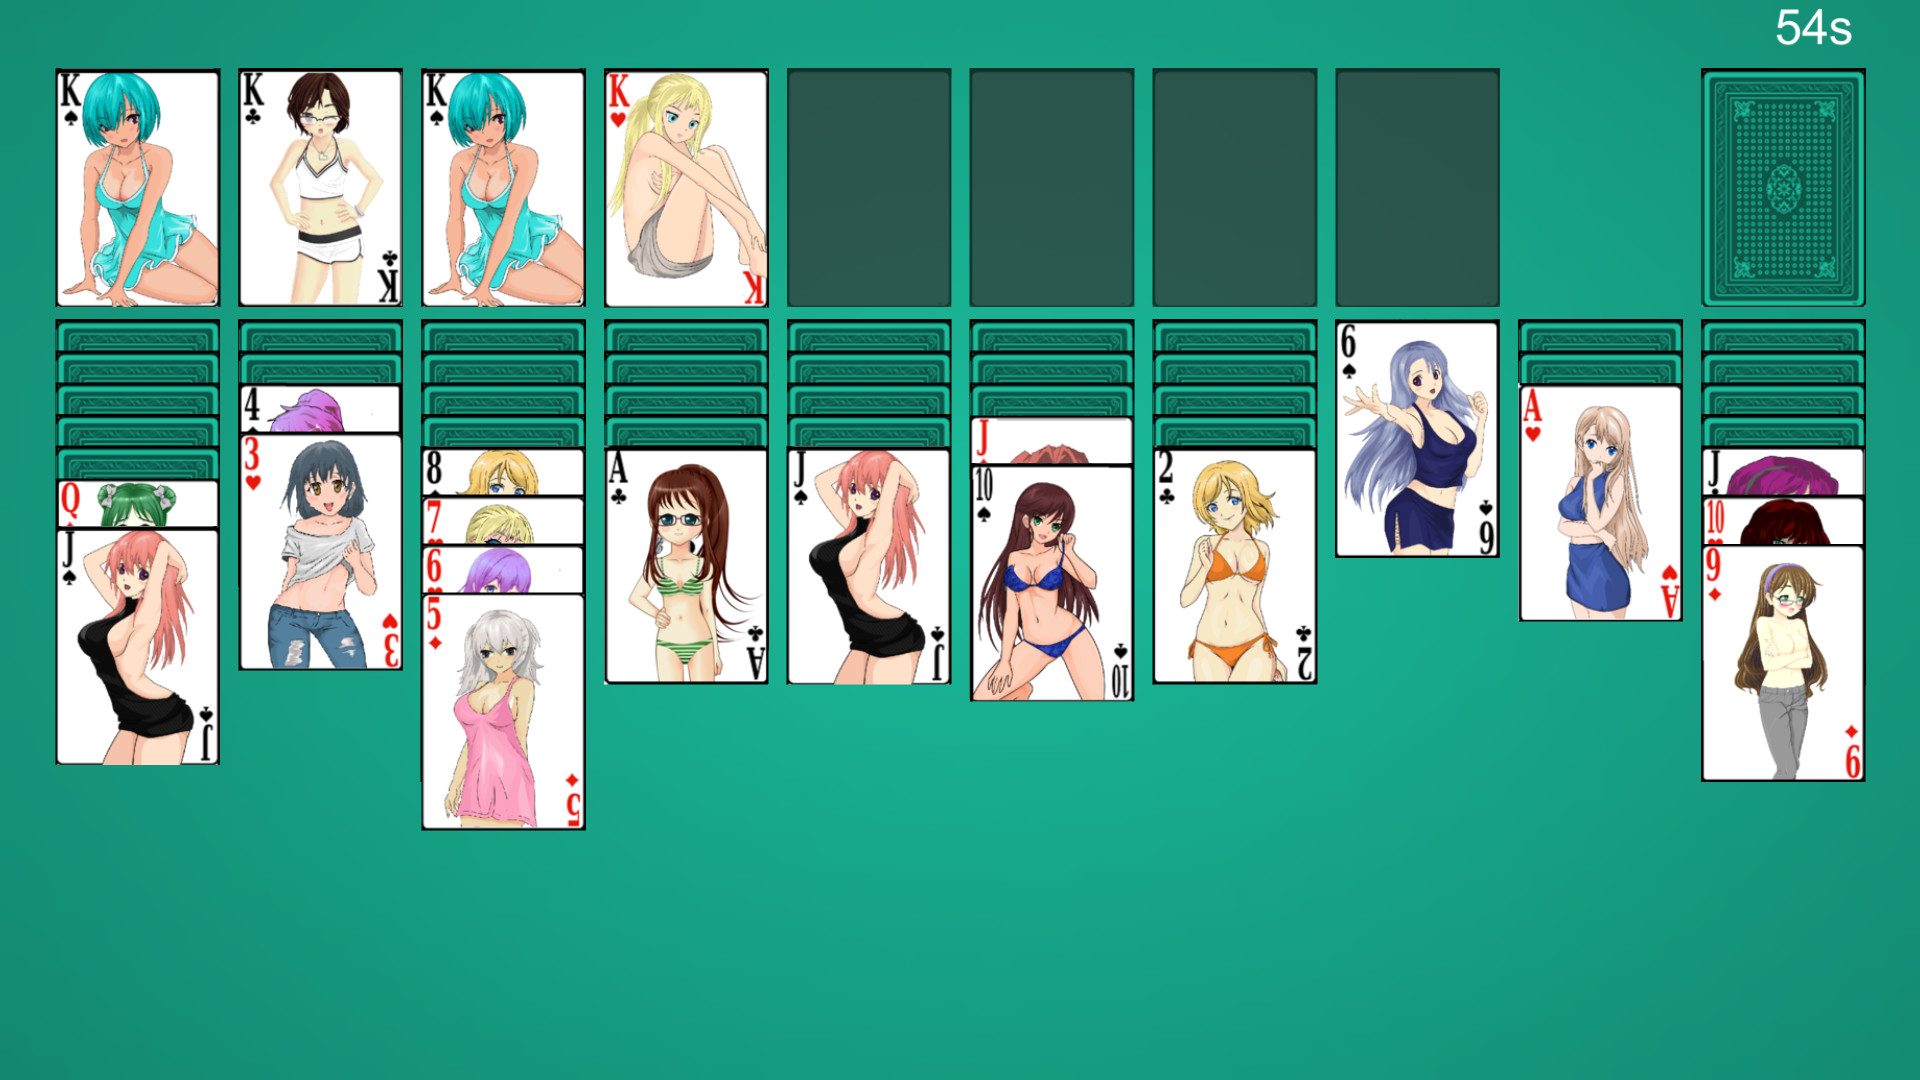 Anime Babes: Solitaire screenshot